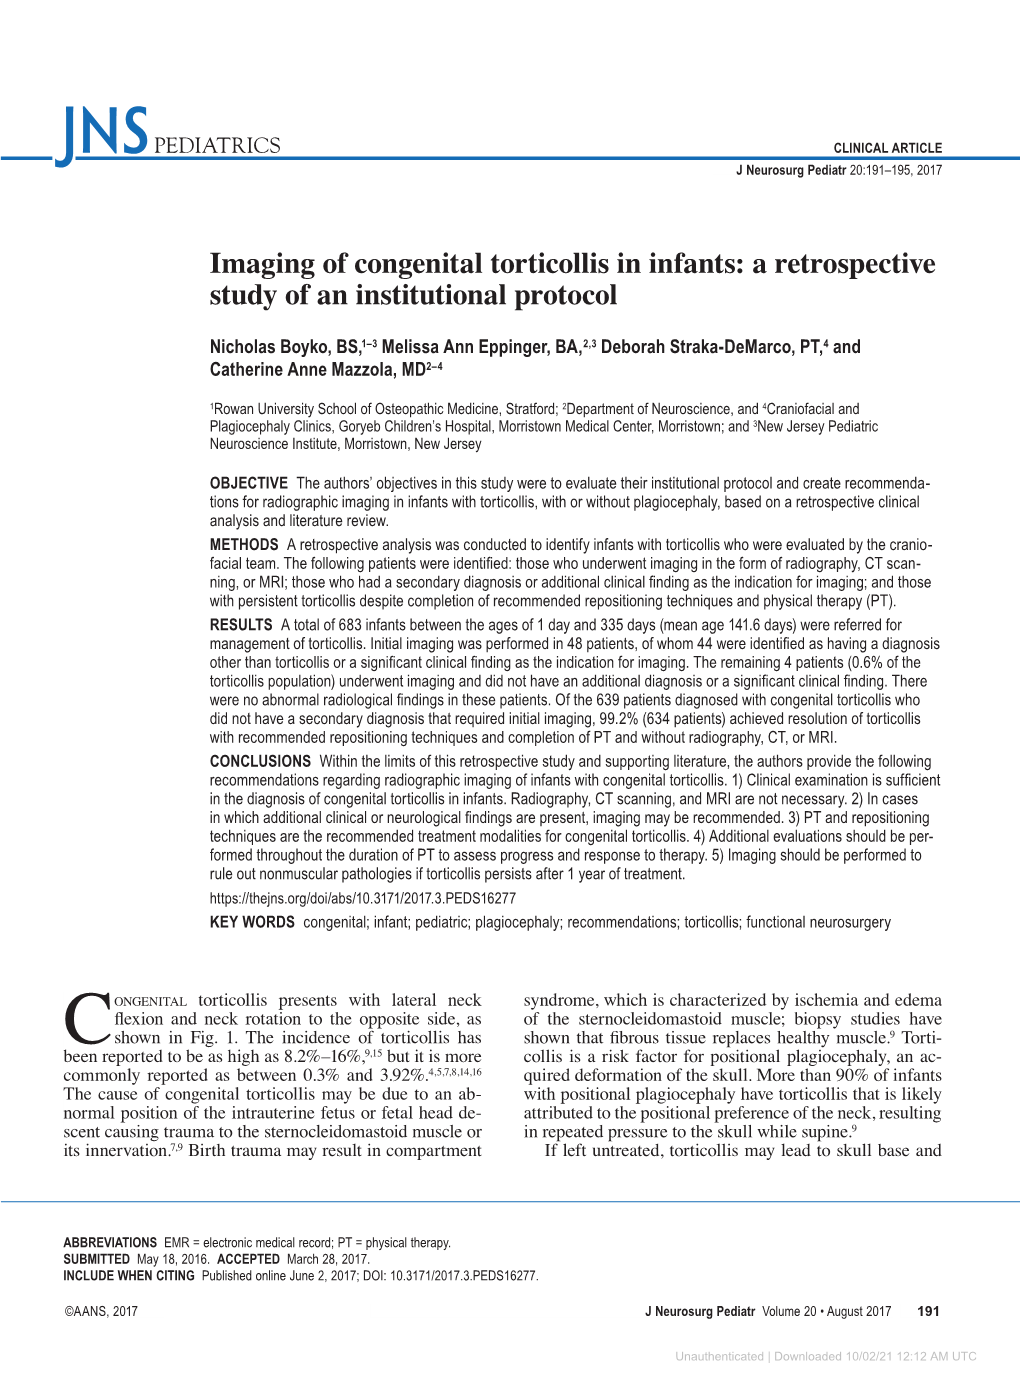 Imaging of Congenital Torticollis in Infants: a Retrospective Study of an Institutional Protocol